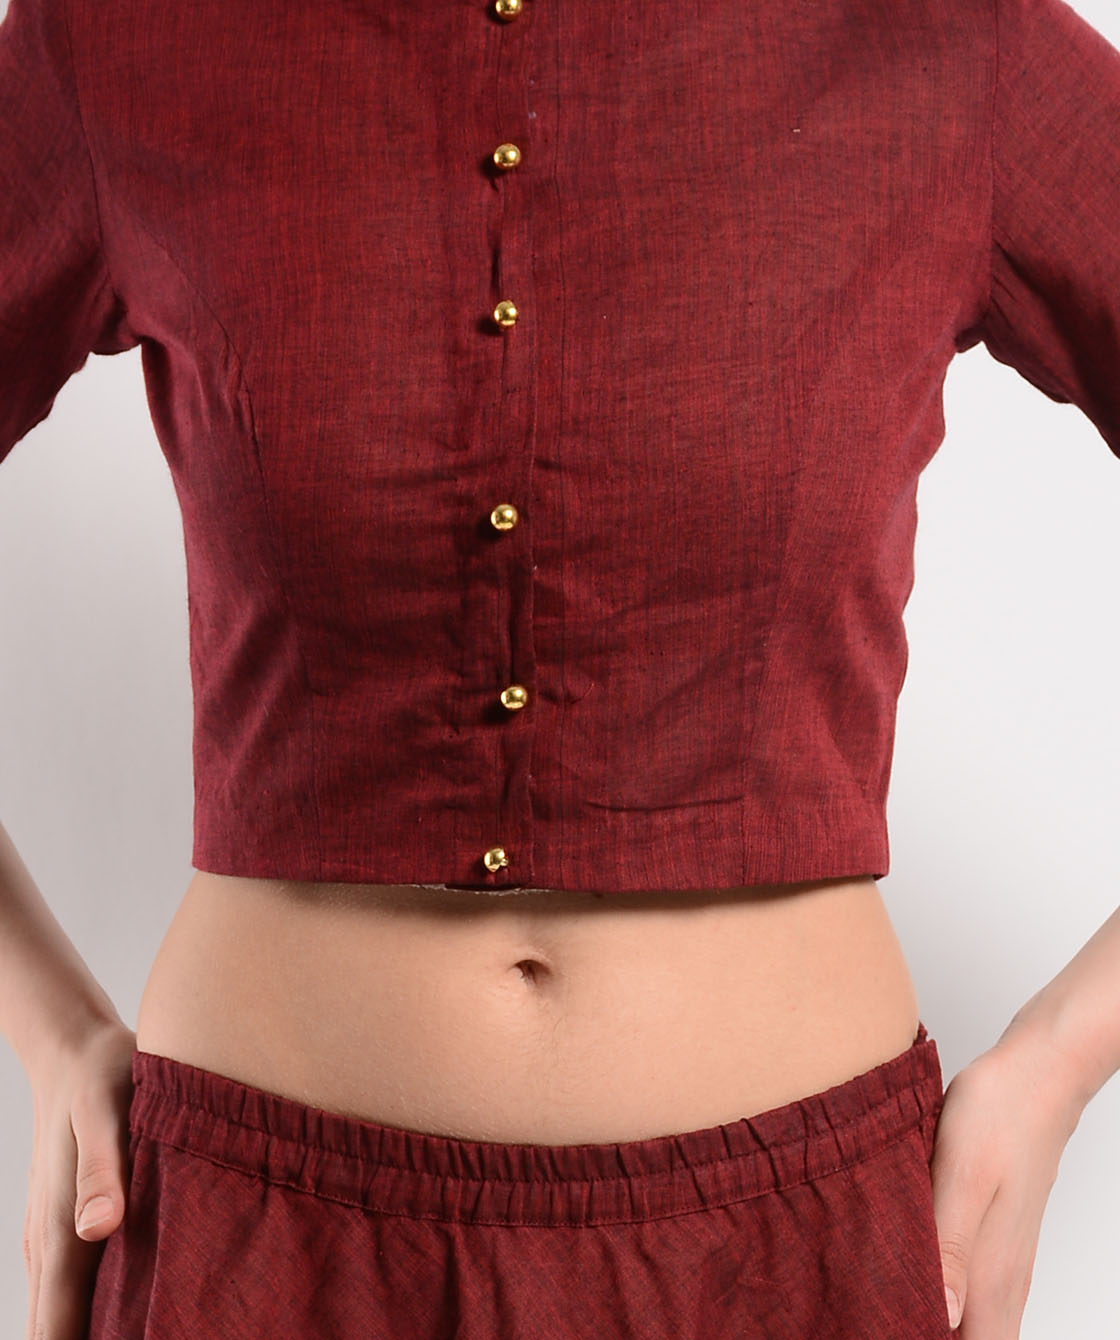 Maroon crop top and skirt set by ANS The Secret Label